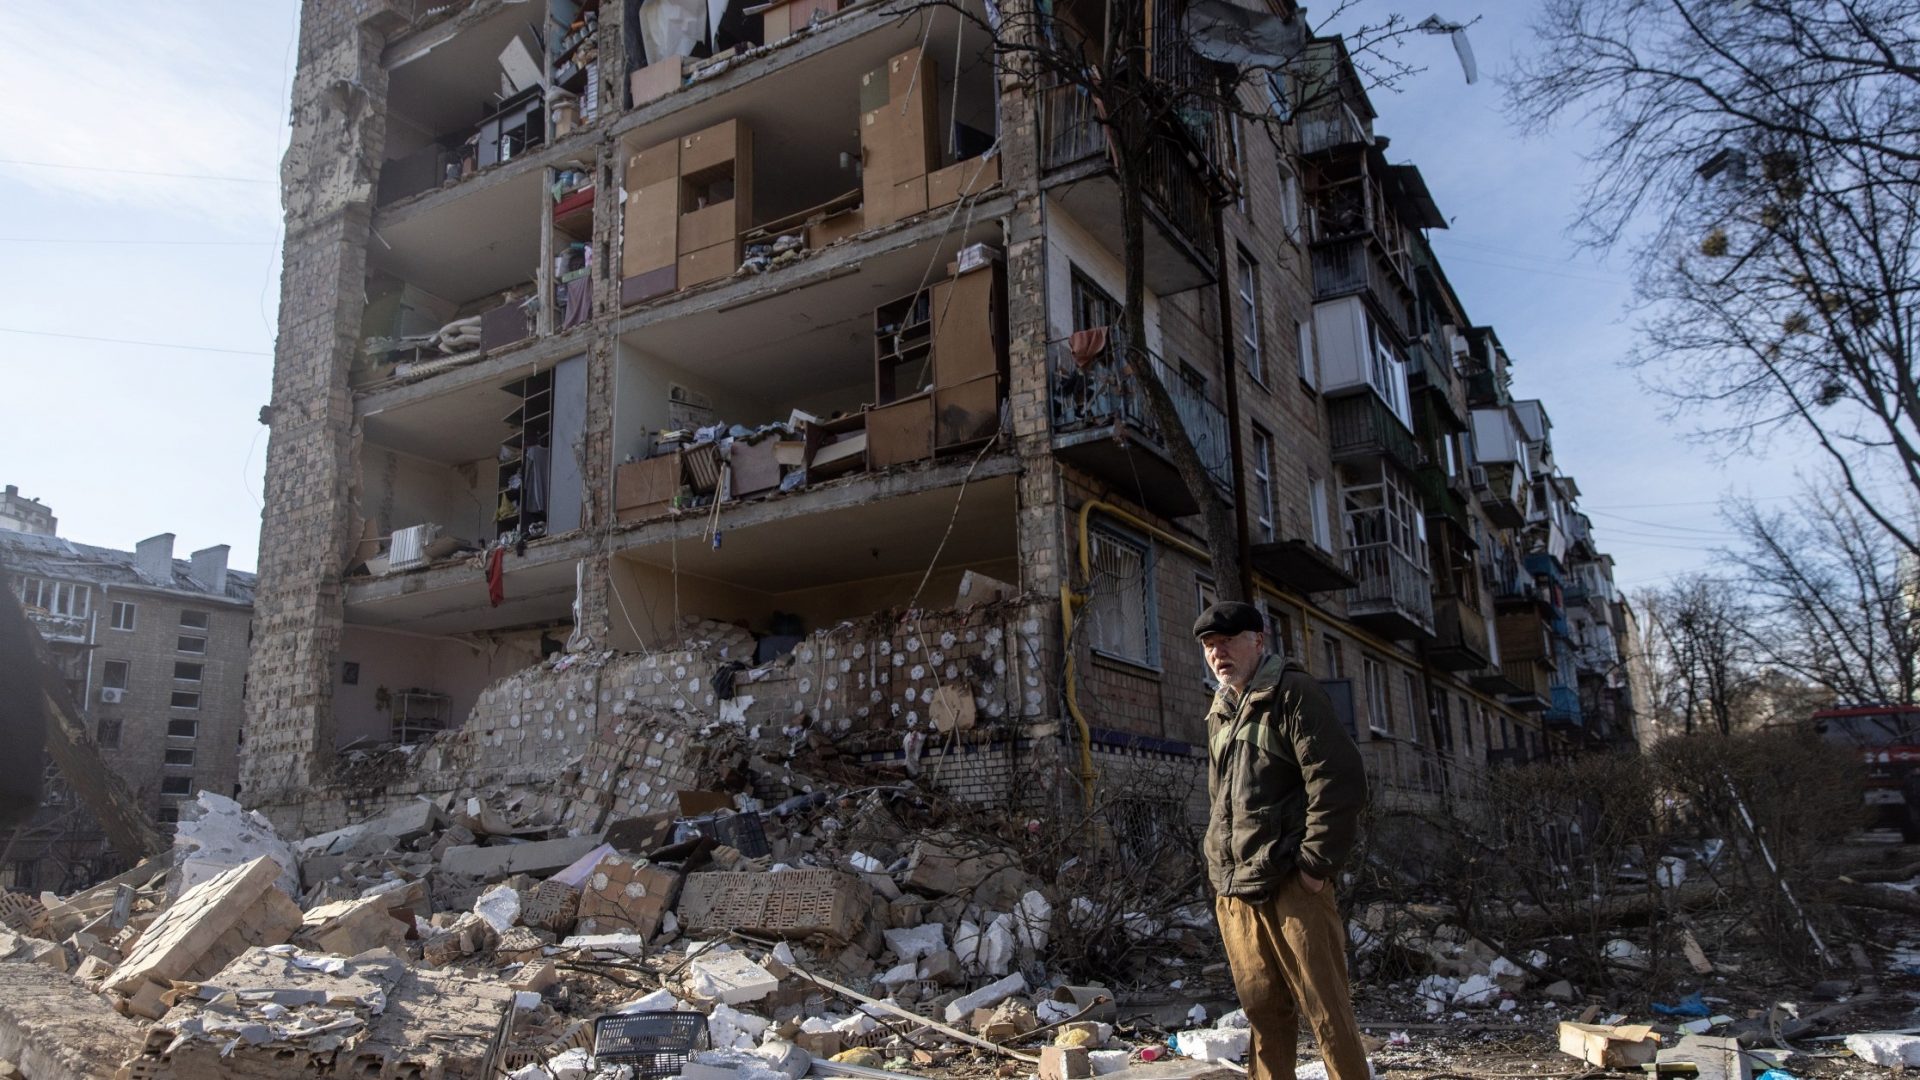 A man stands amid debris in front of a residential apartment complex in Kyiv that was heavily damaged by a Russian attack in March 2022. Photo: Chris McGrath/Getty